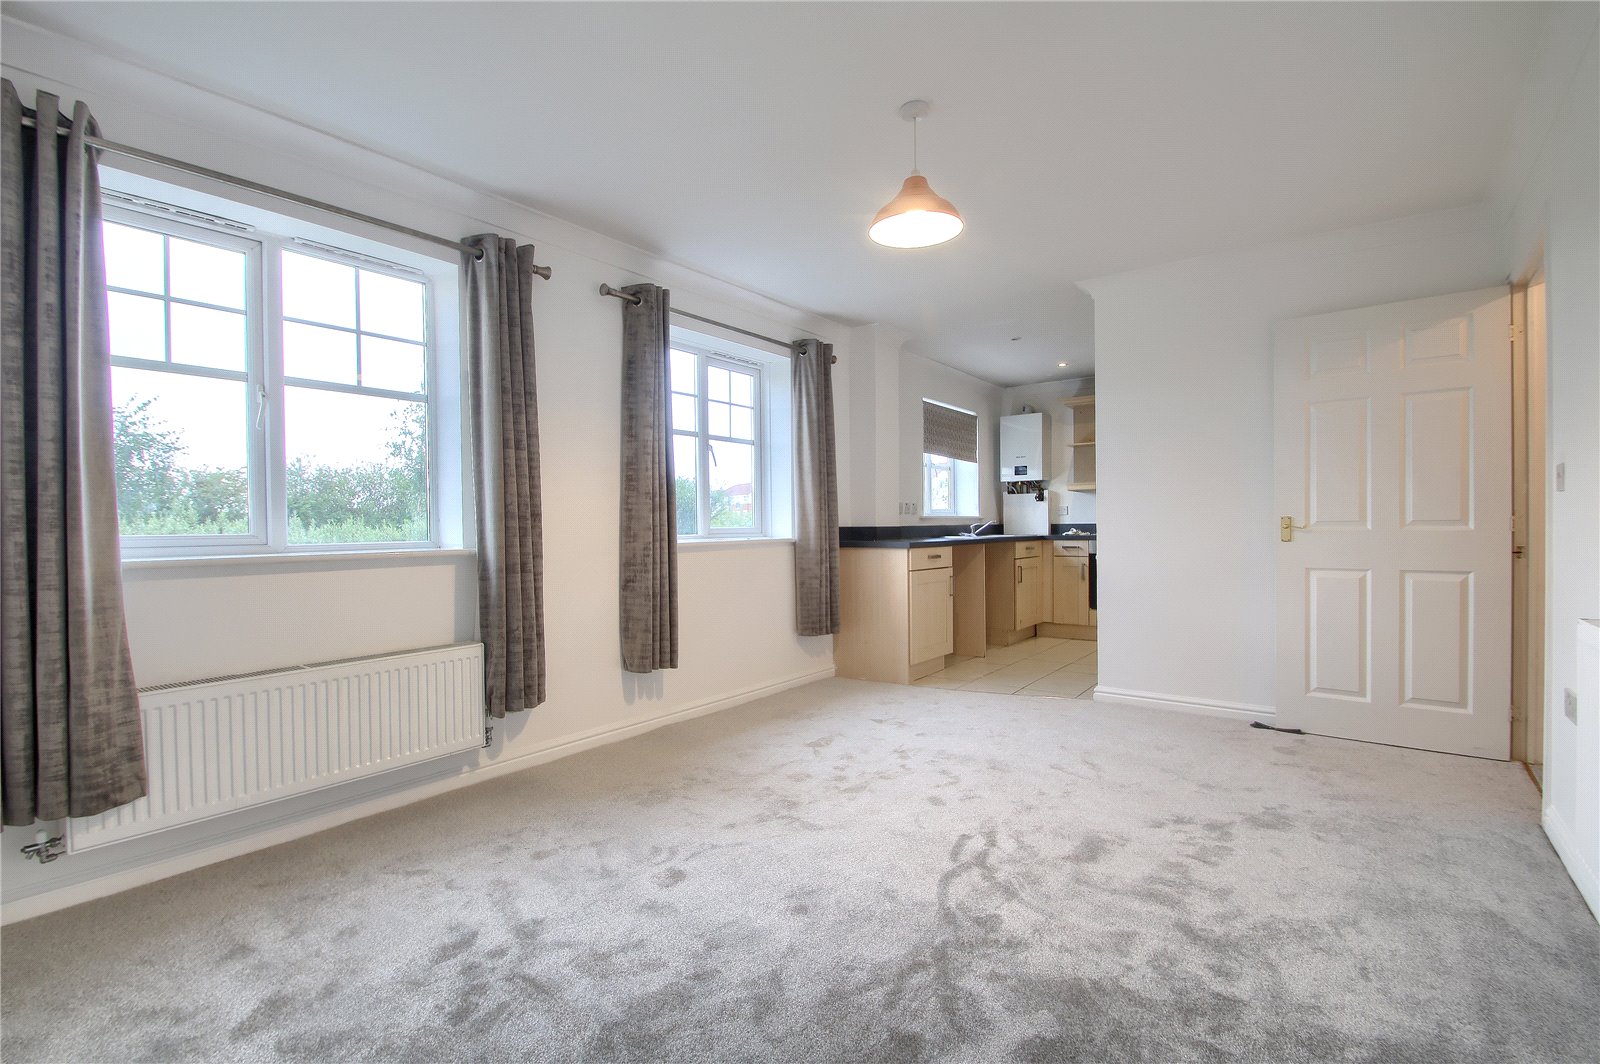 2 bed apartment for sale in Longleat Walk, Ingleby Barwick  - Property Image 2